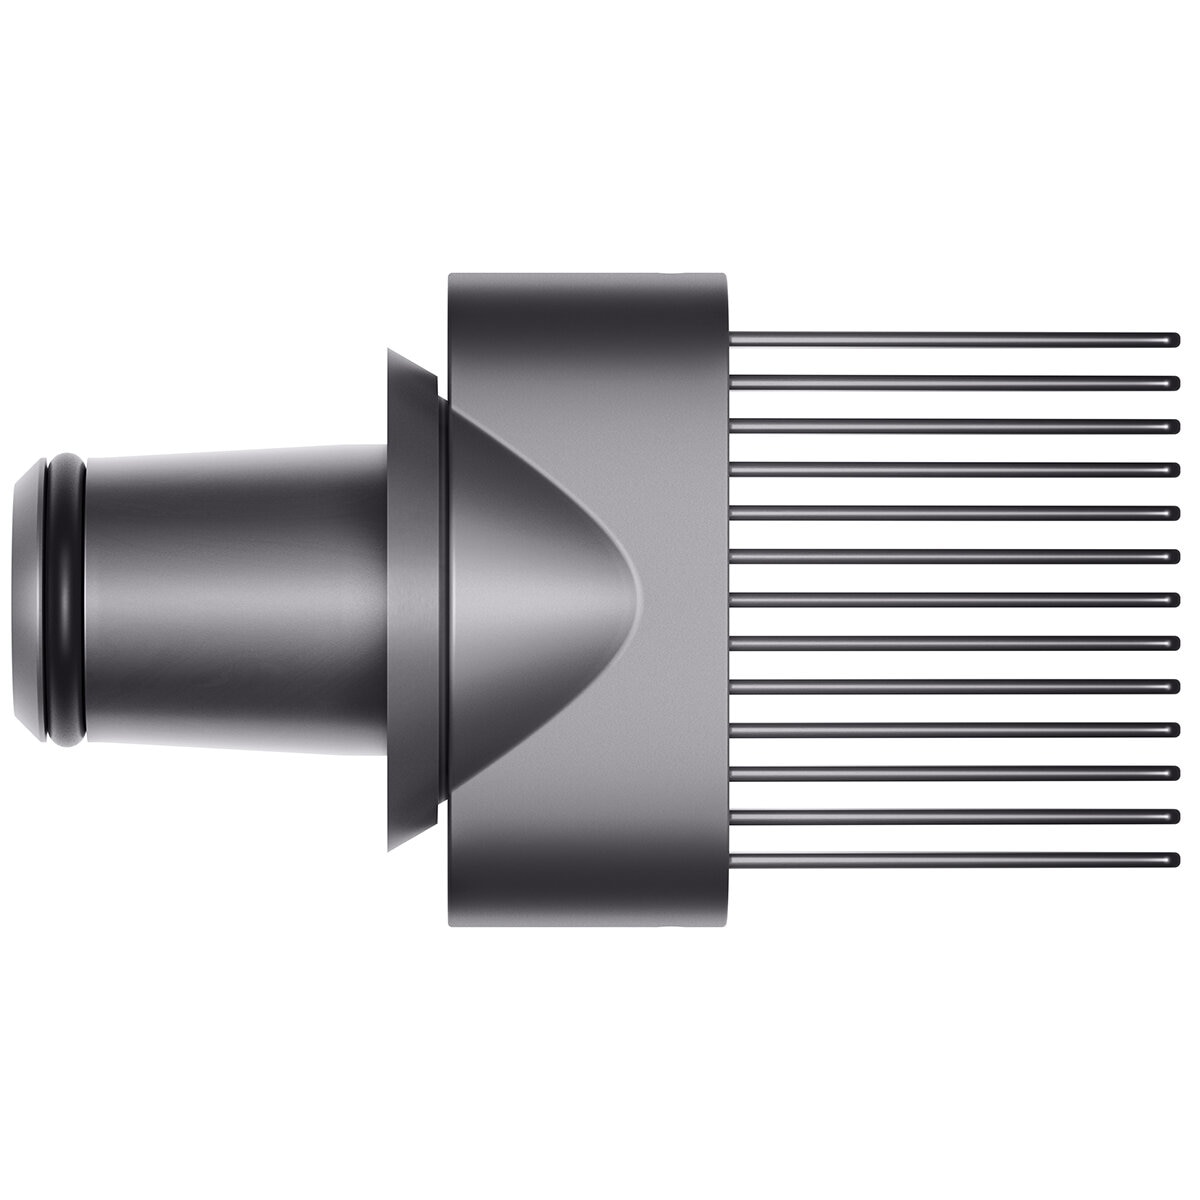 Dyson Supersonic Air Dryer 386738-01